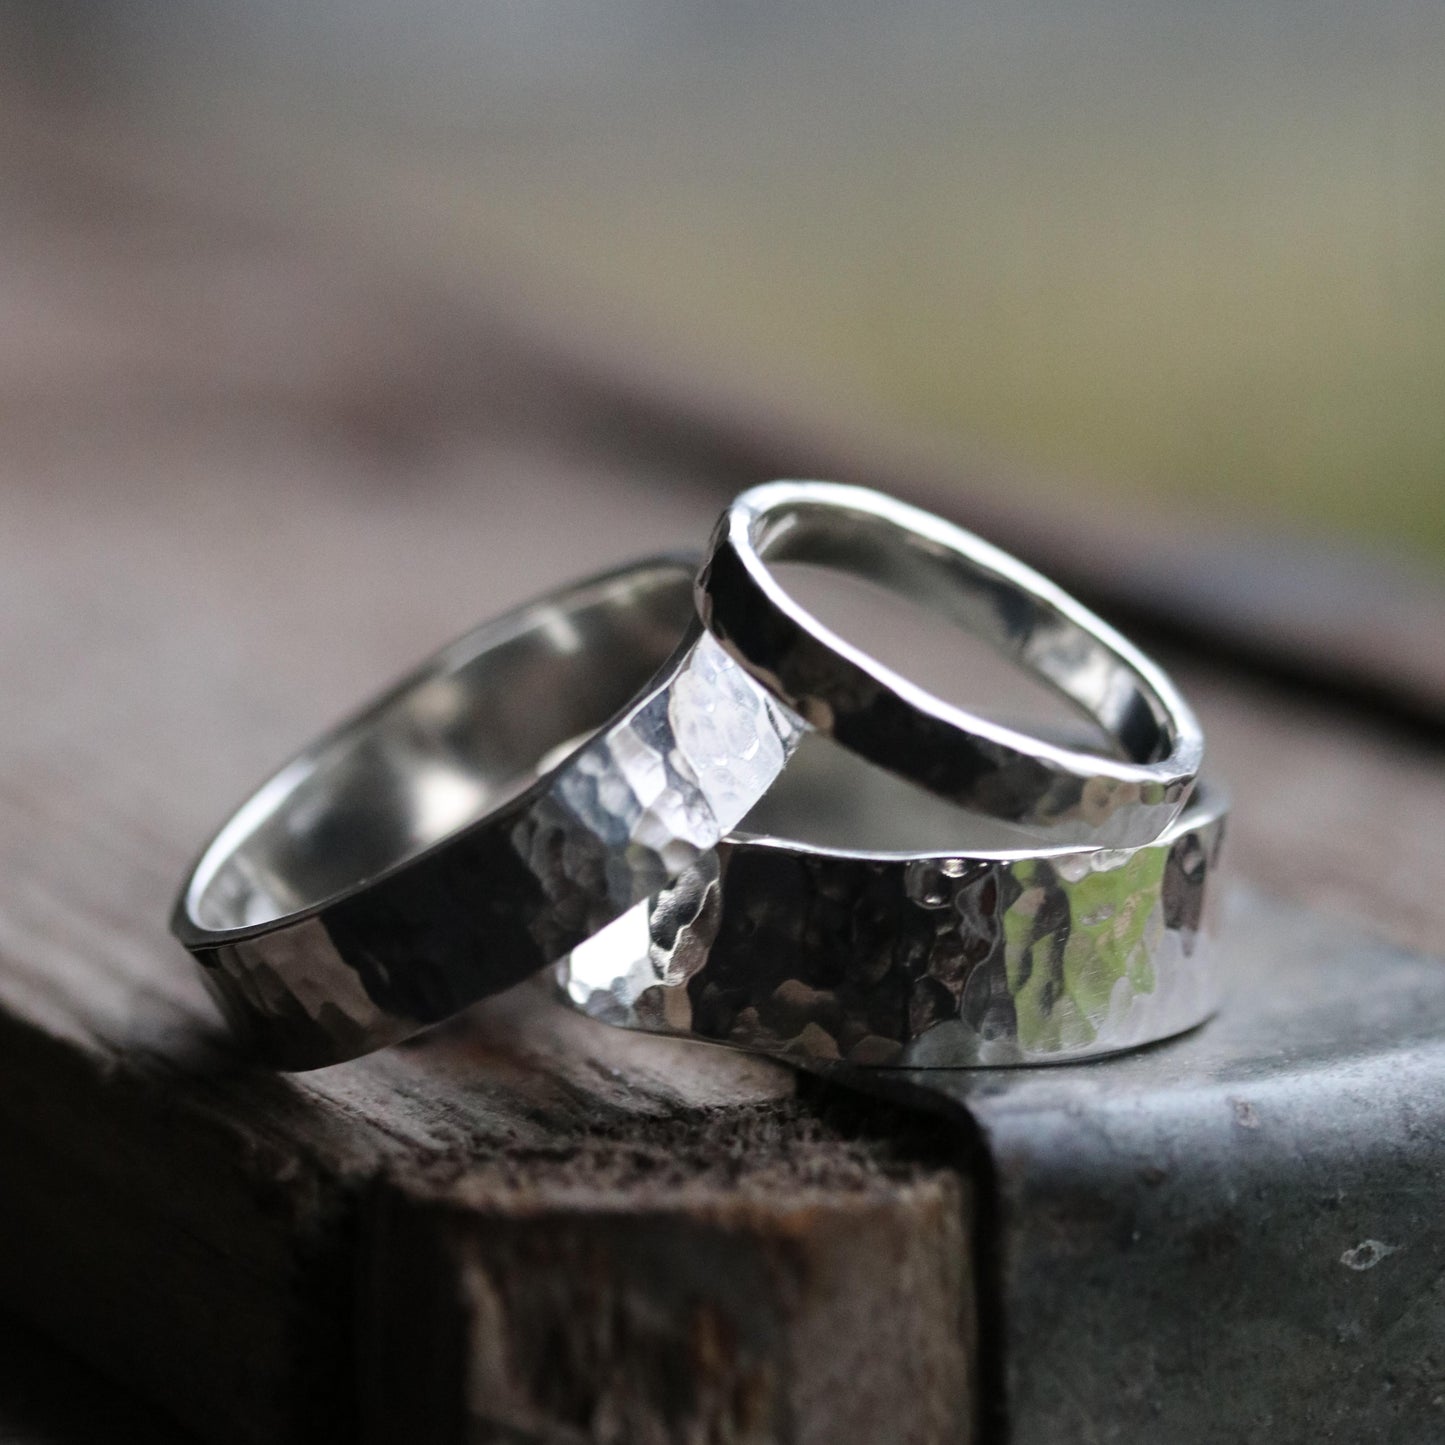 Sun 19th May - Hammered Ring 1/2 Day Class